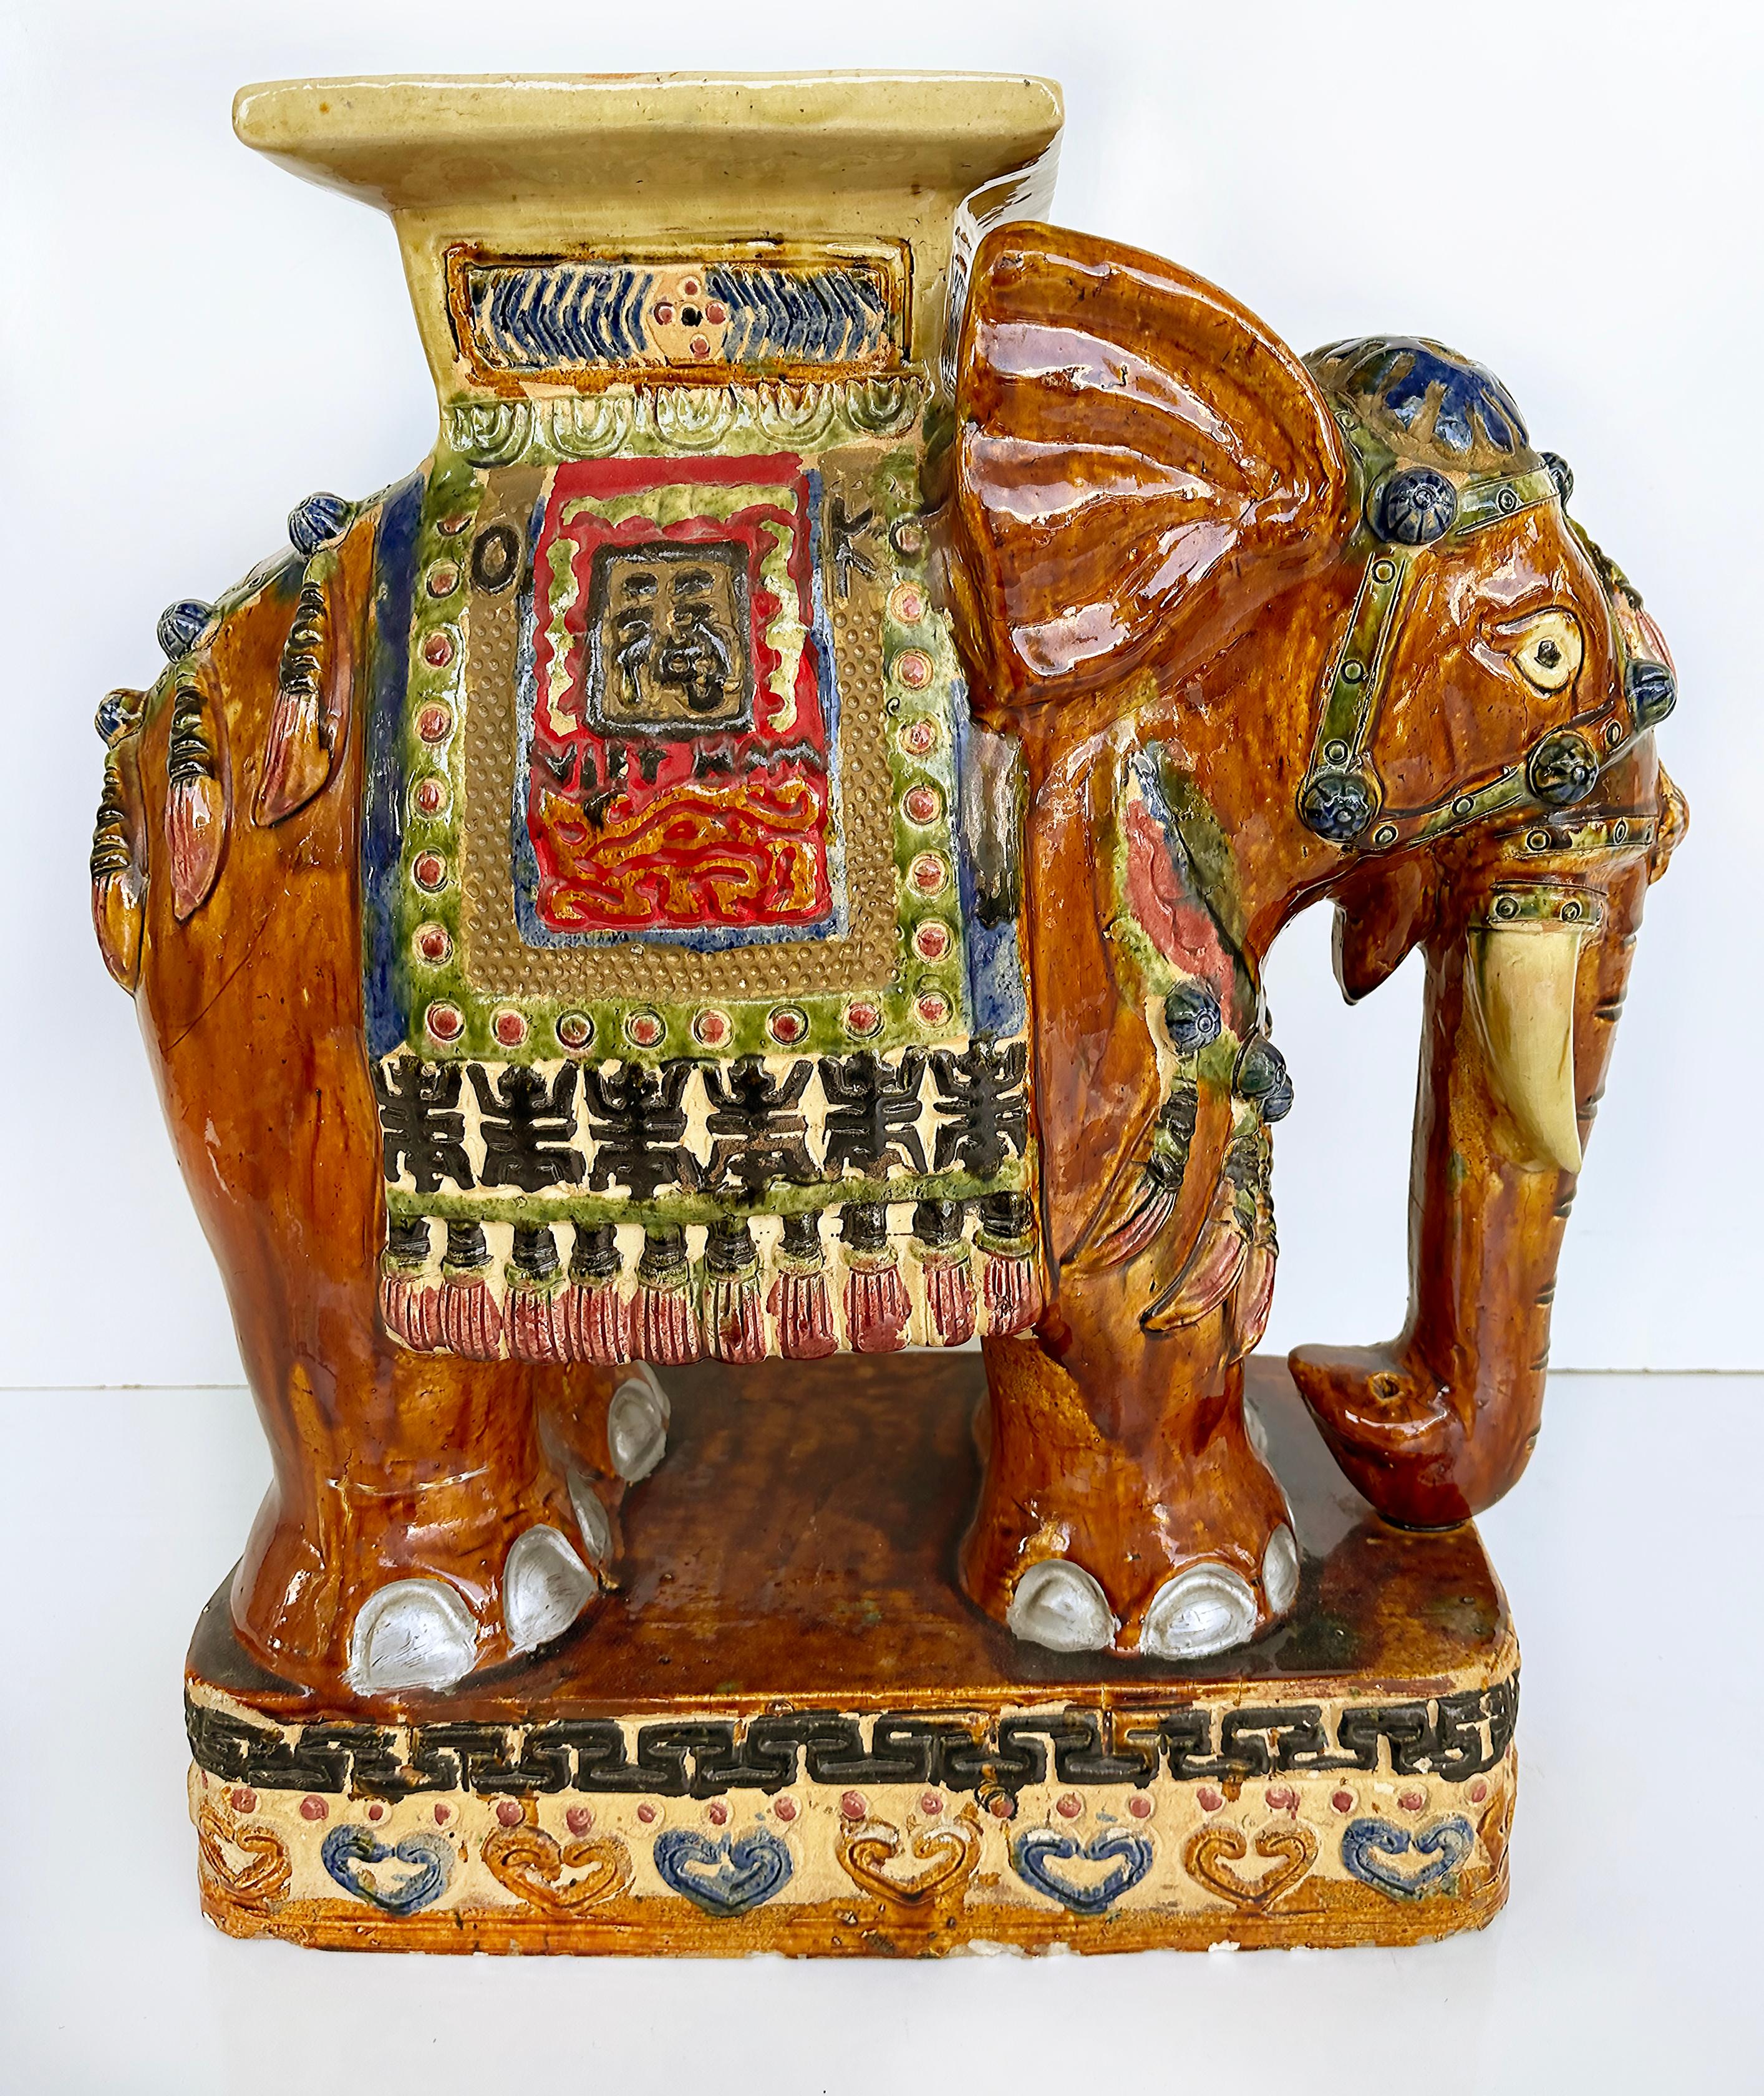 Mid-century Terracotta Elephant Garden Stool Drinks Table Plant Stand

Offered for sale is a mid-century hand-painted and glazed elephant garden stool that will make a charming drinks table or plant stand. The garden stool has imperfections on one